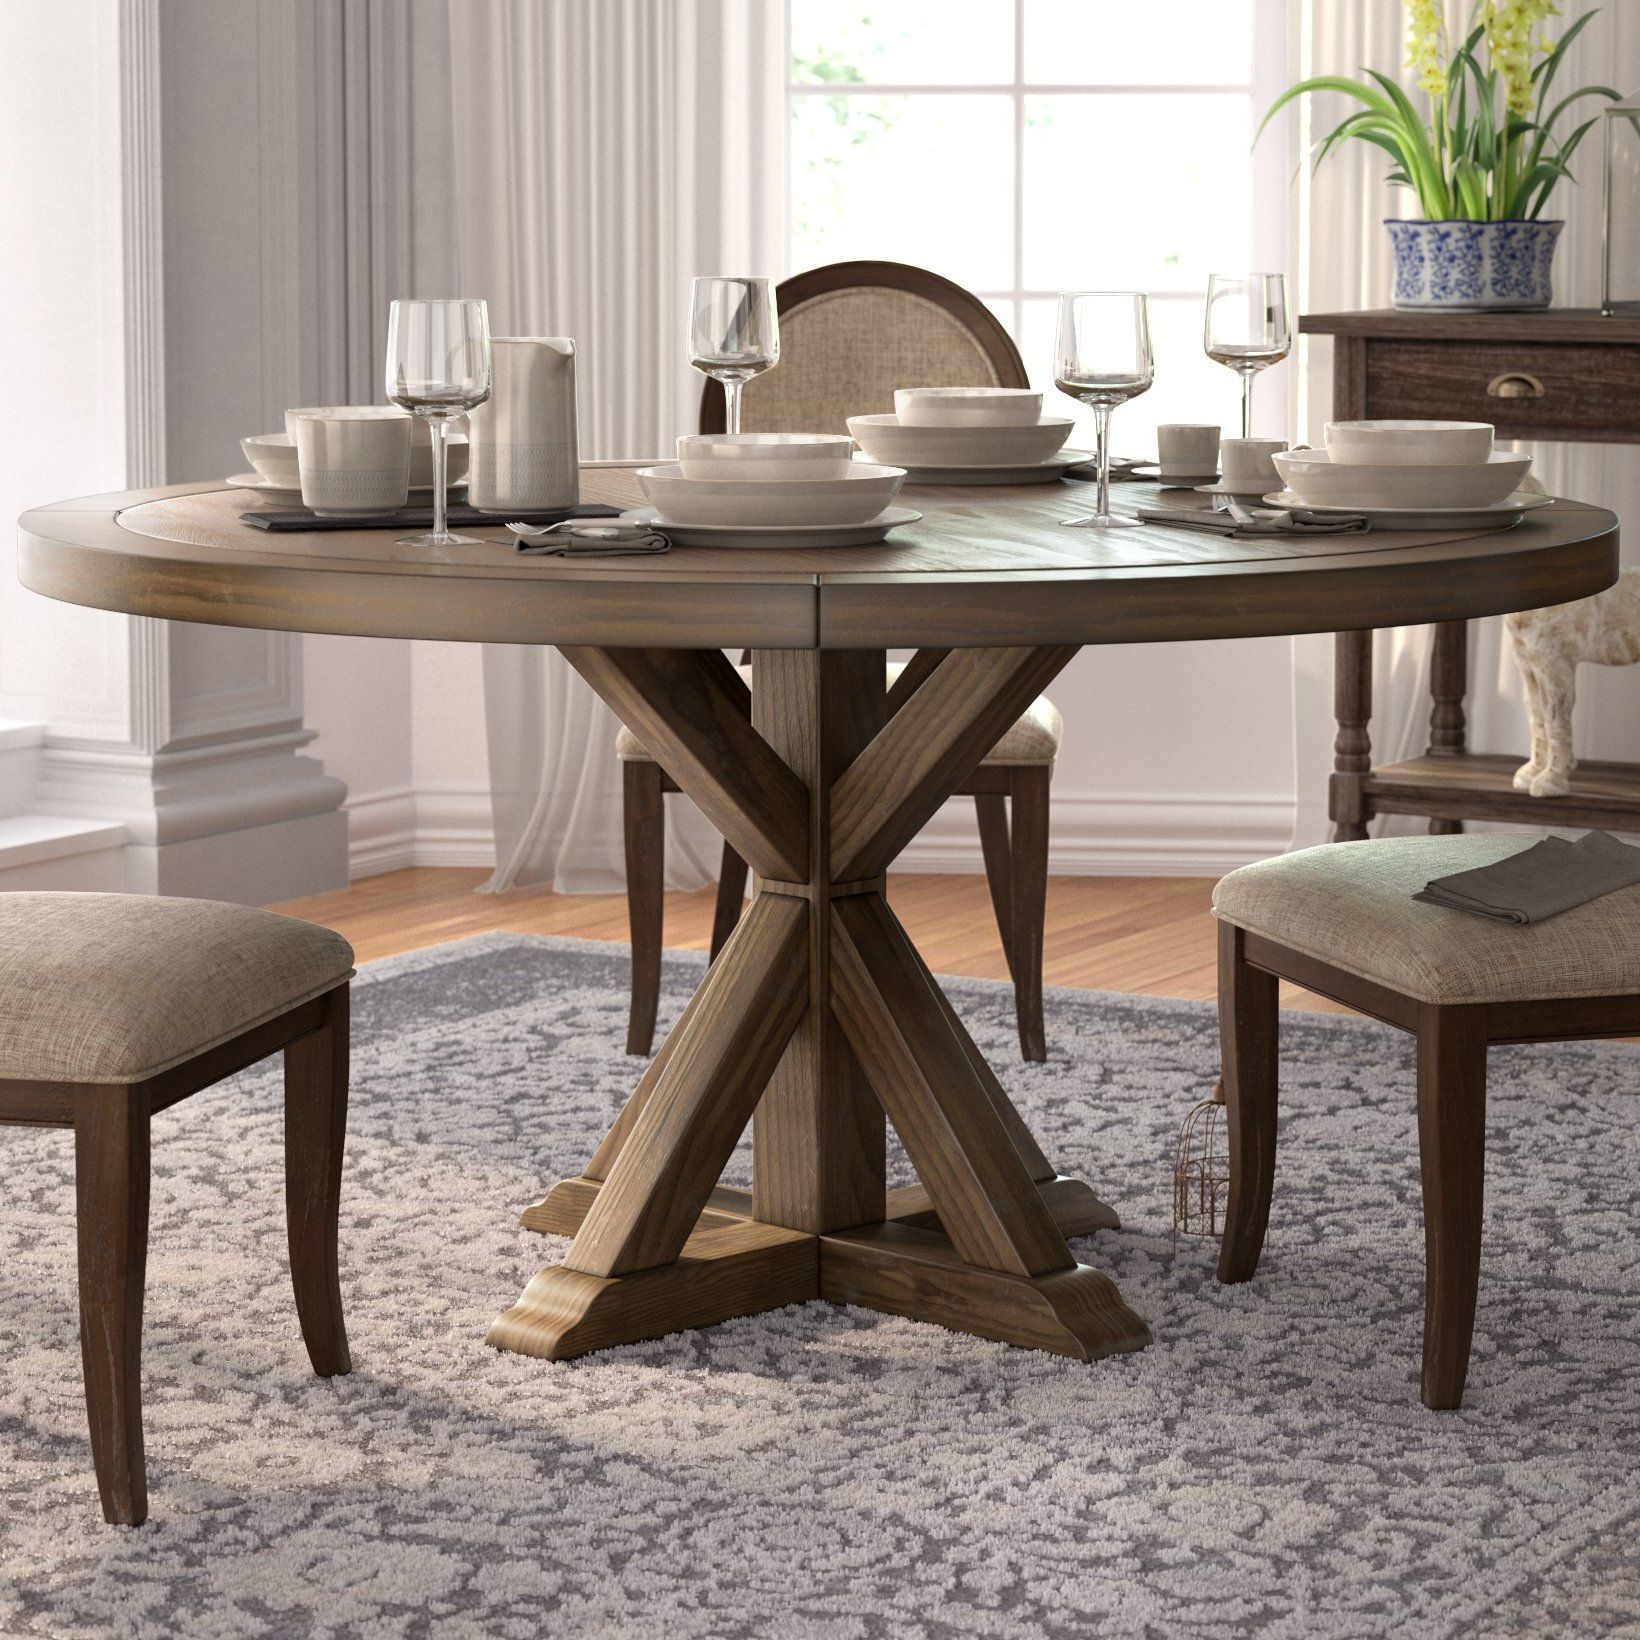 Small Round Dining Tables With Reclaimed Wood Inside Fashionable One Allium Way Armancourt Reclaimed Wood Round Dining Table (View 11 of 30)